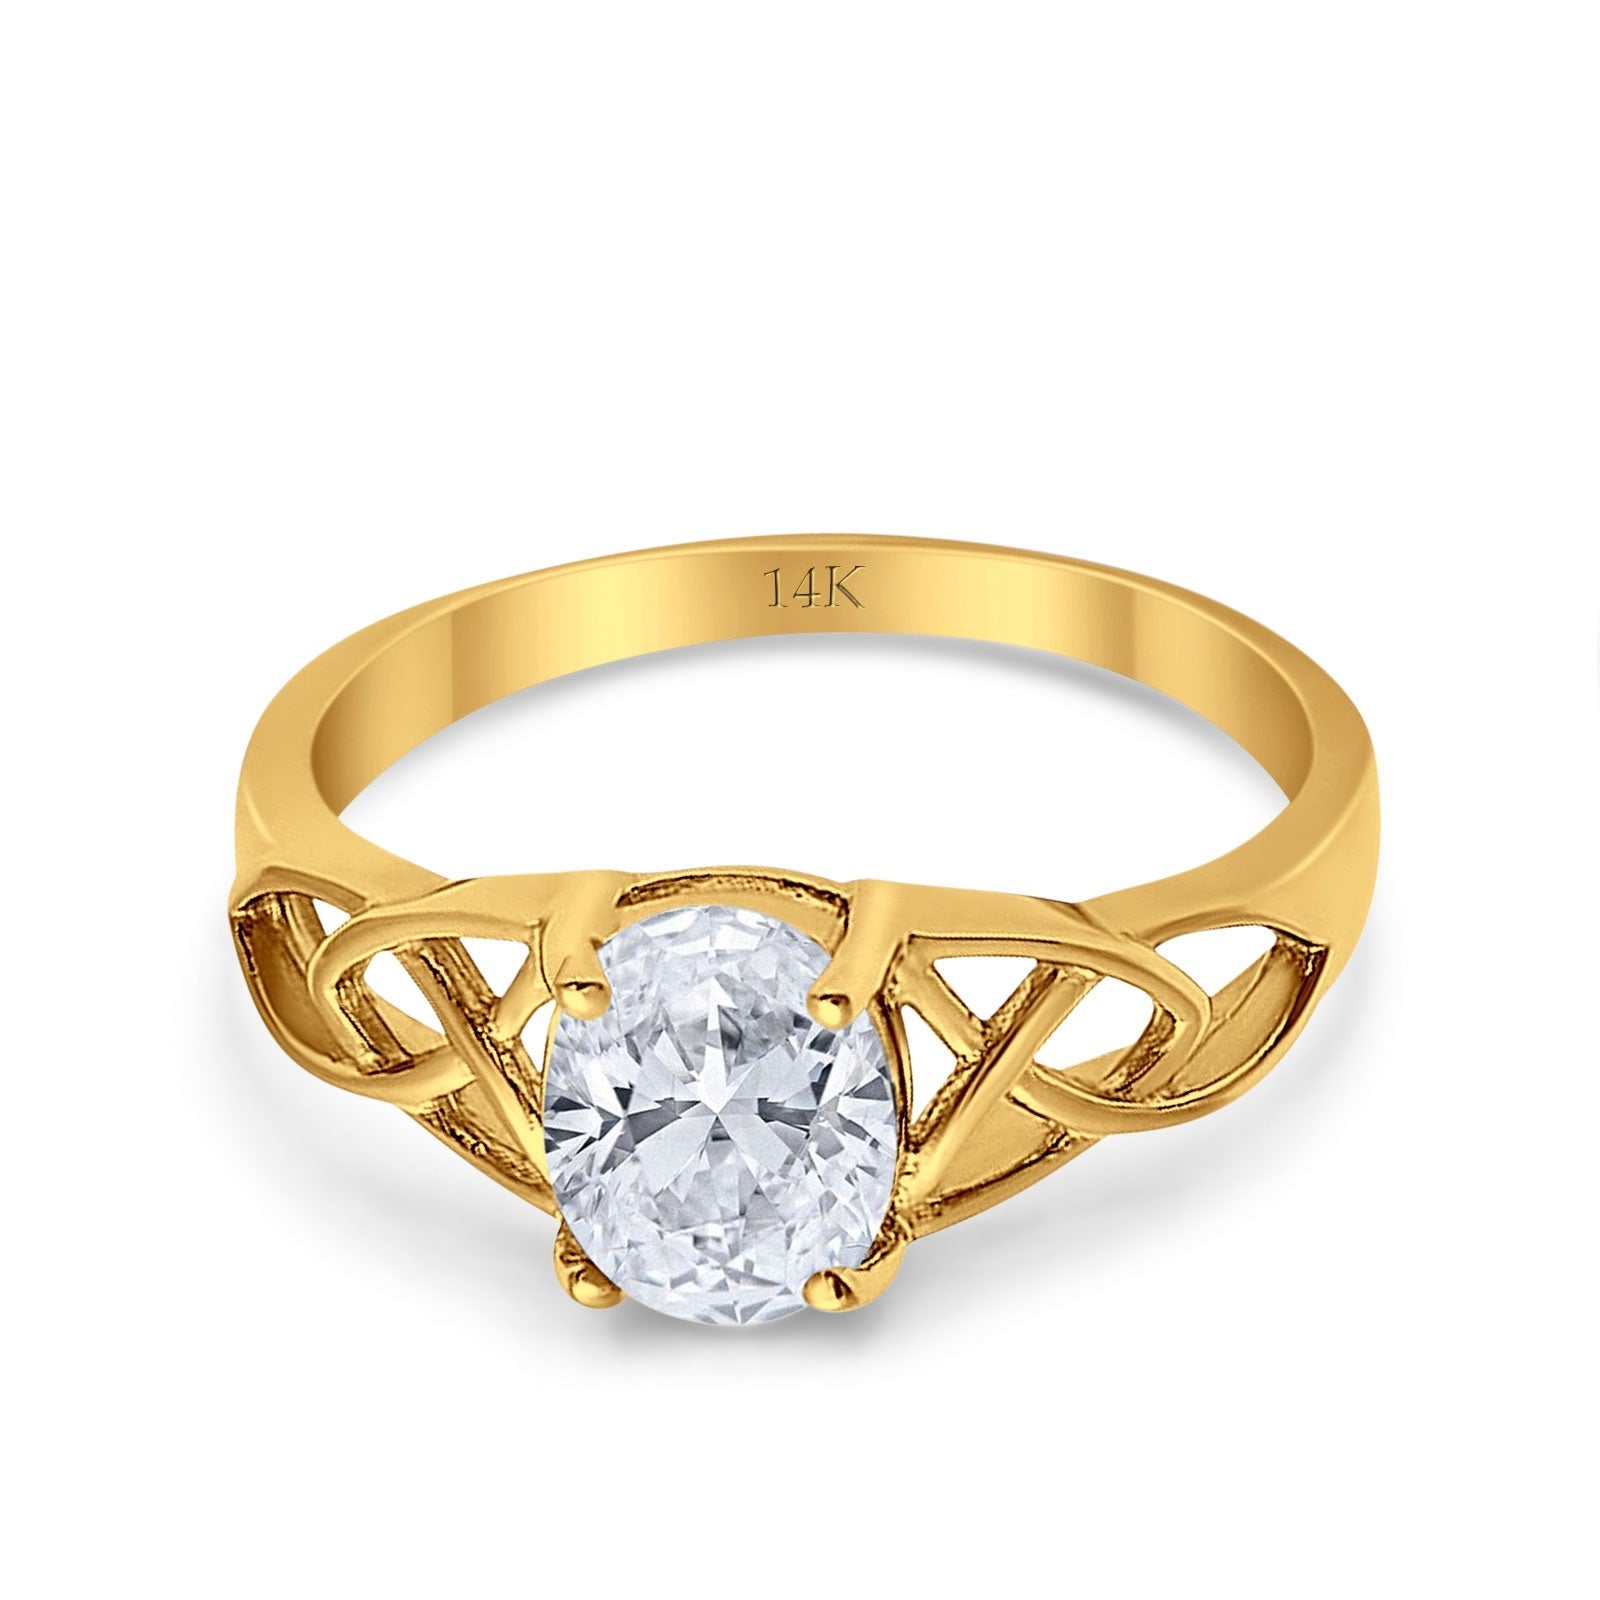 14K Gold Accent Solitaire Oval Shape Bridal Wedding Engagement Ring Simulated Cubic Zirconia